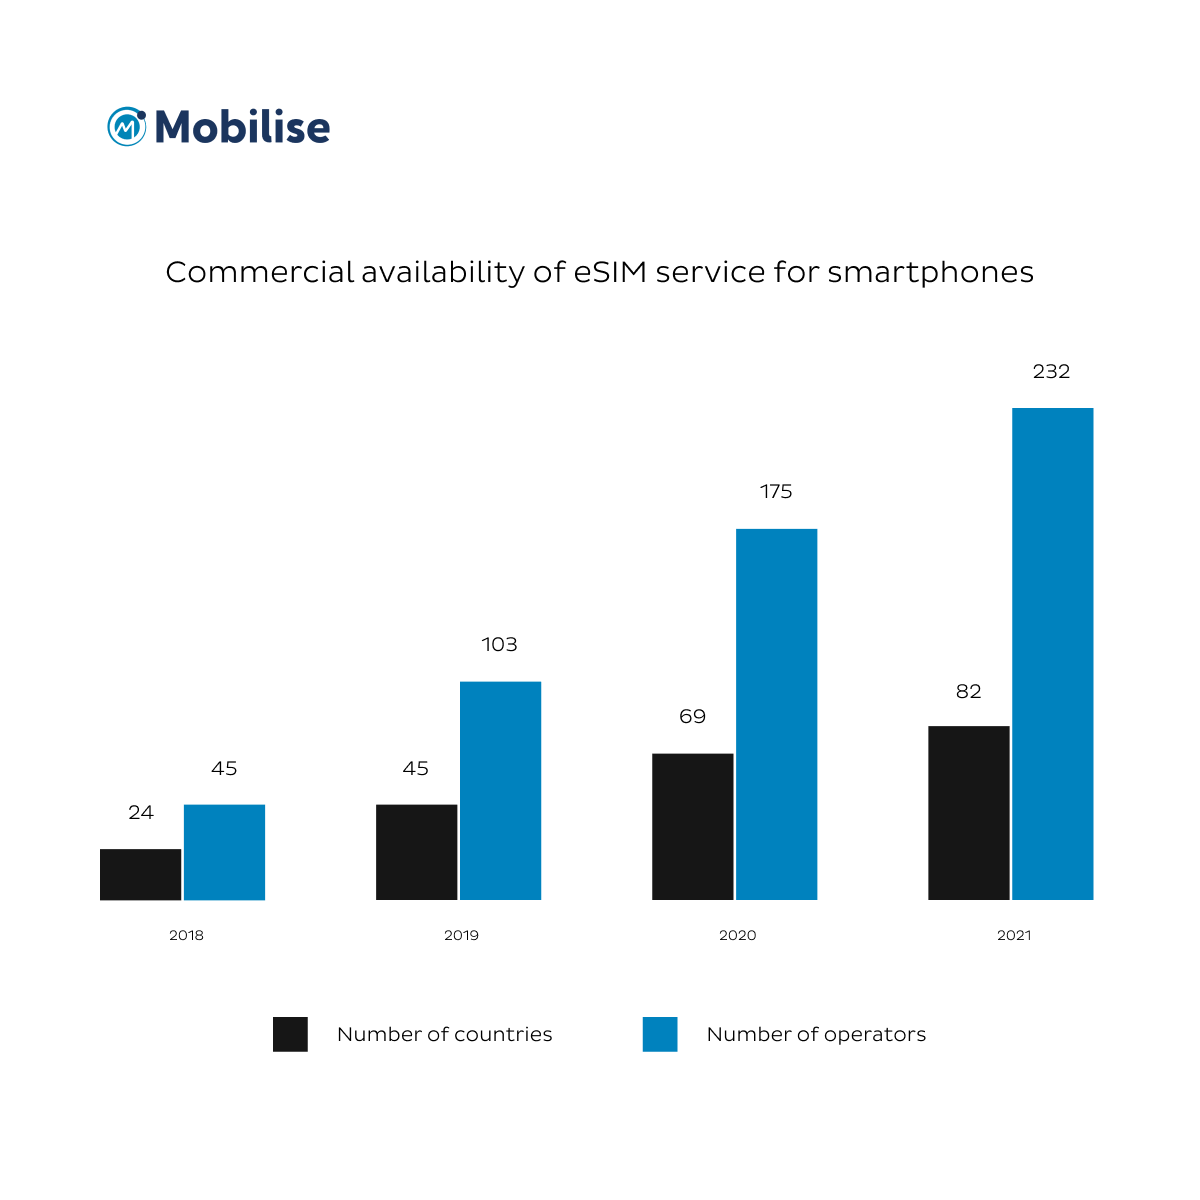 Infographic showing Commercial availability of eSIM service for smartphones